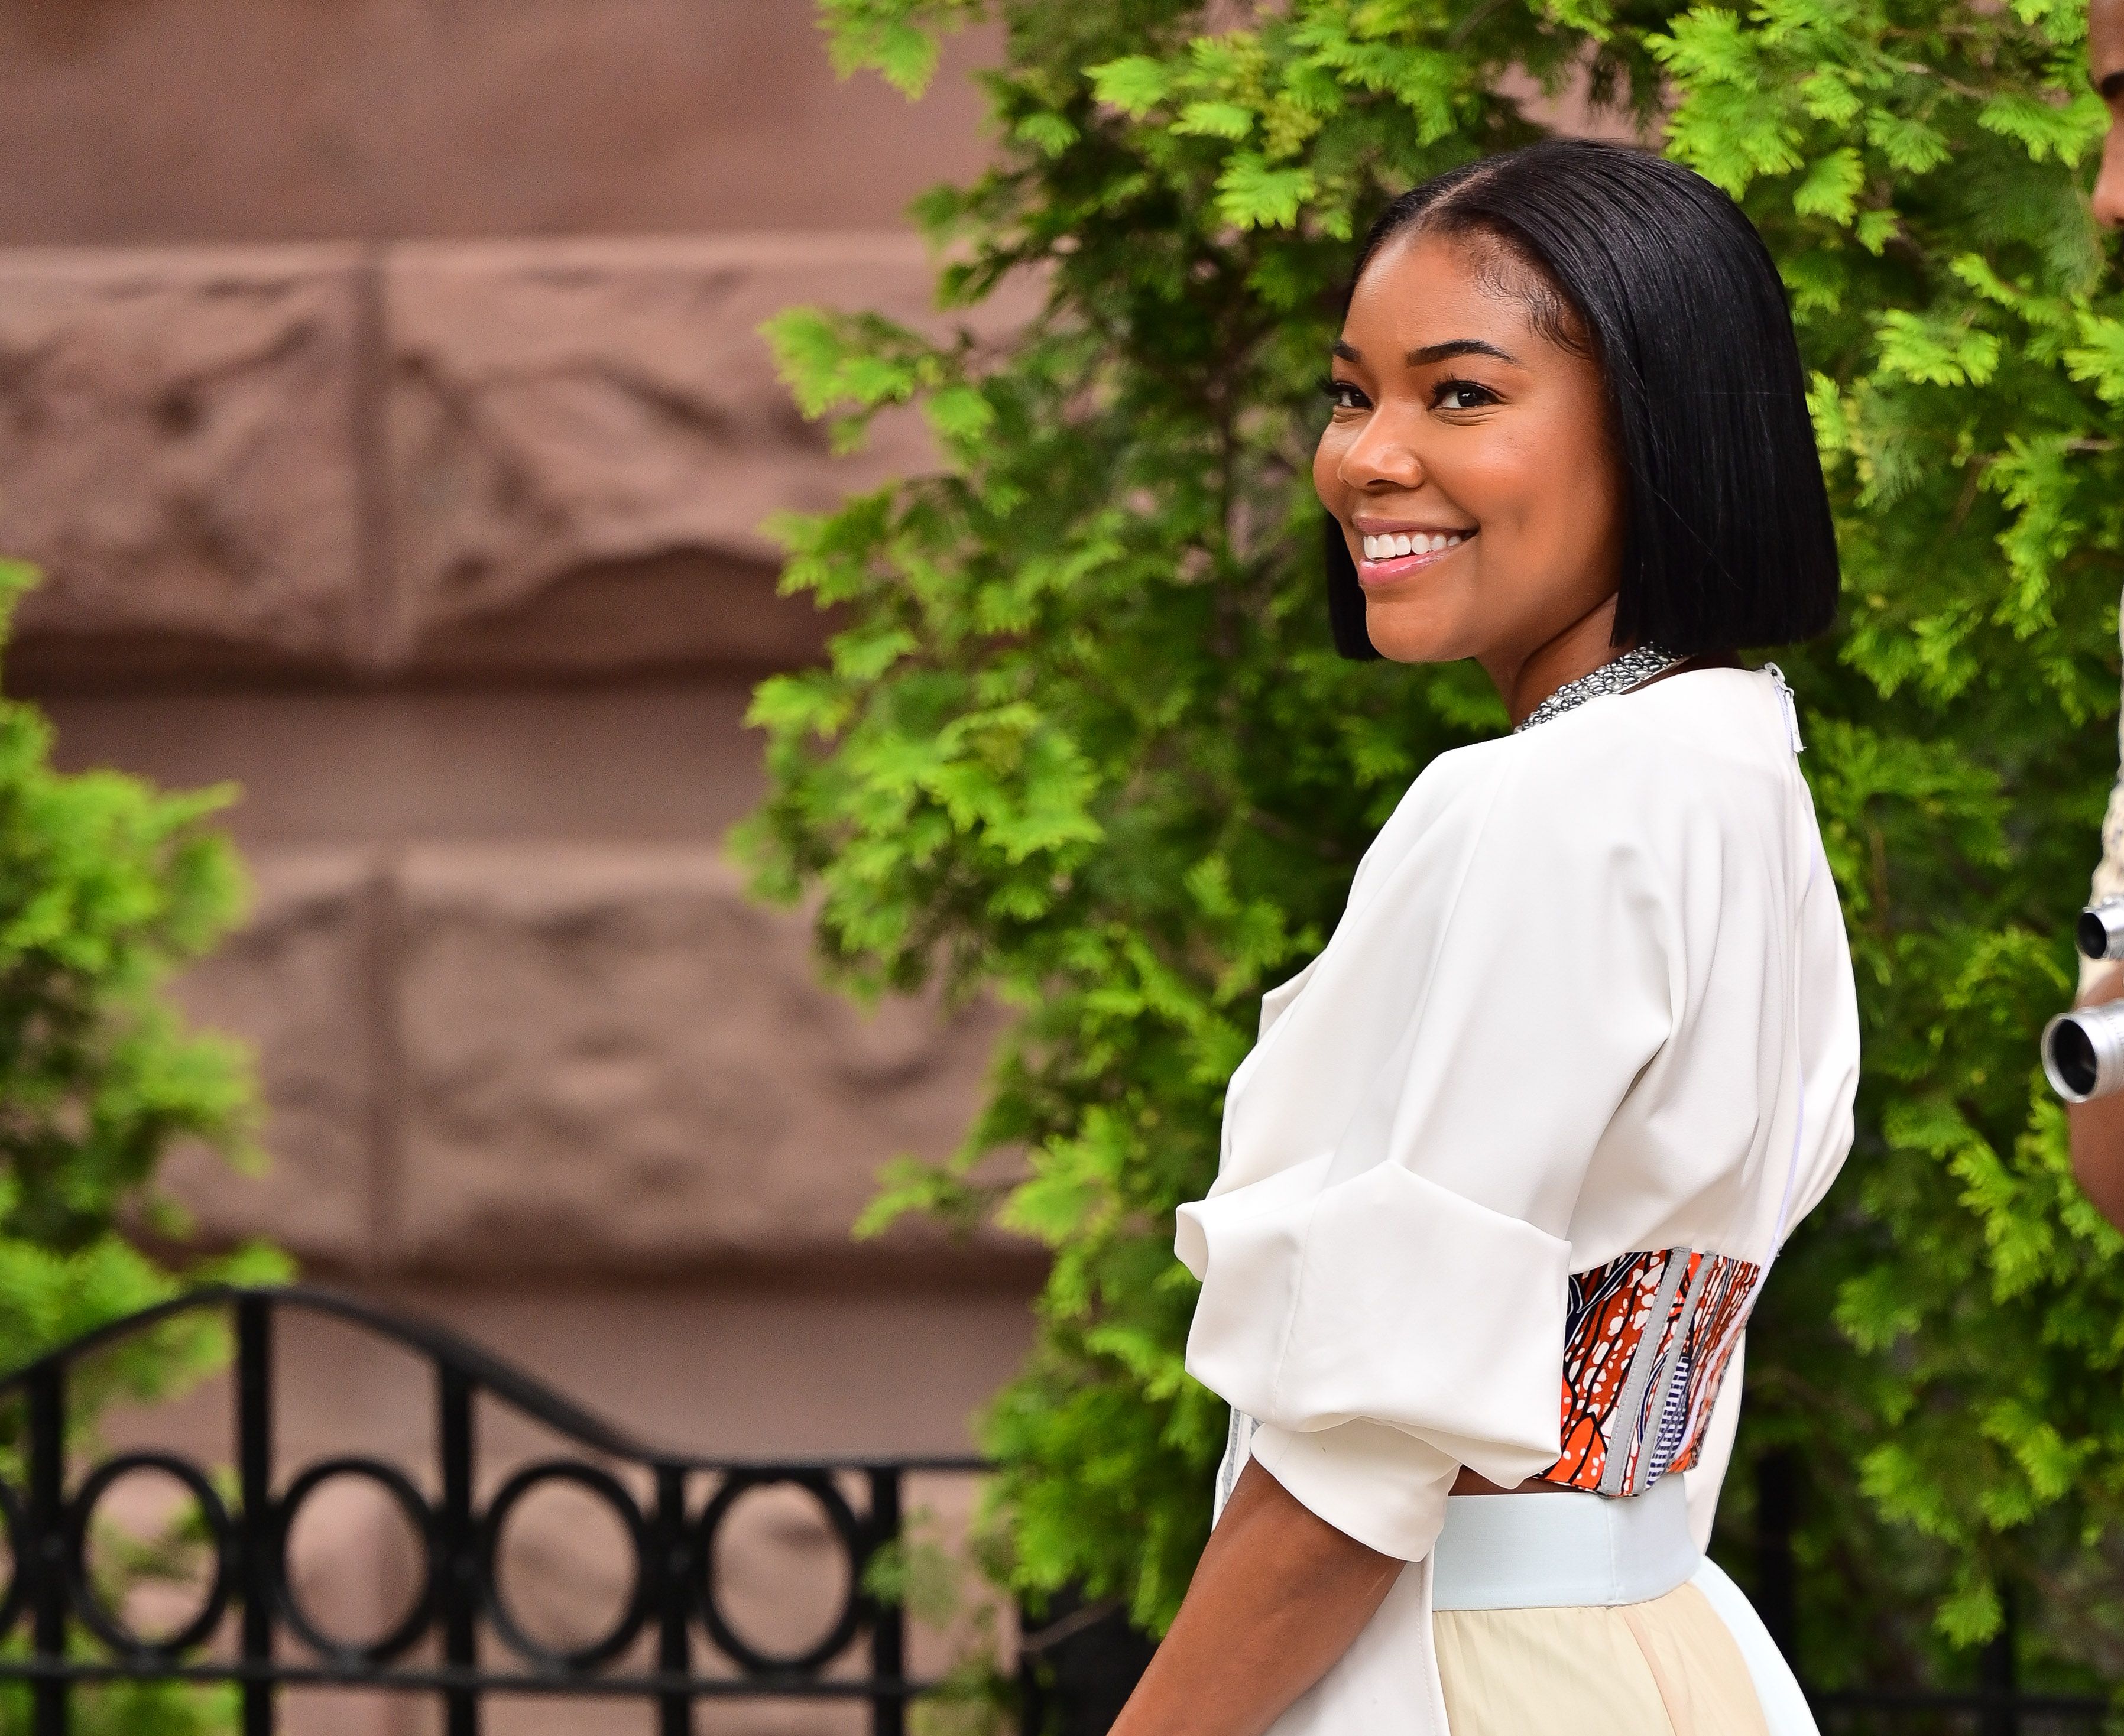 https://hips.hearstapps.com/hmg-prod/images/gabrielle-union-seen-on-the-set-of-the-perfect-find-in-news-photo-1631549327.jpg